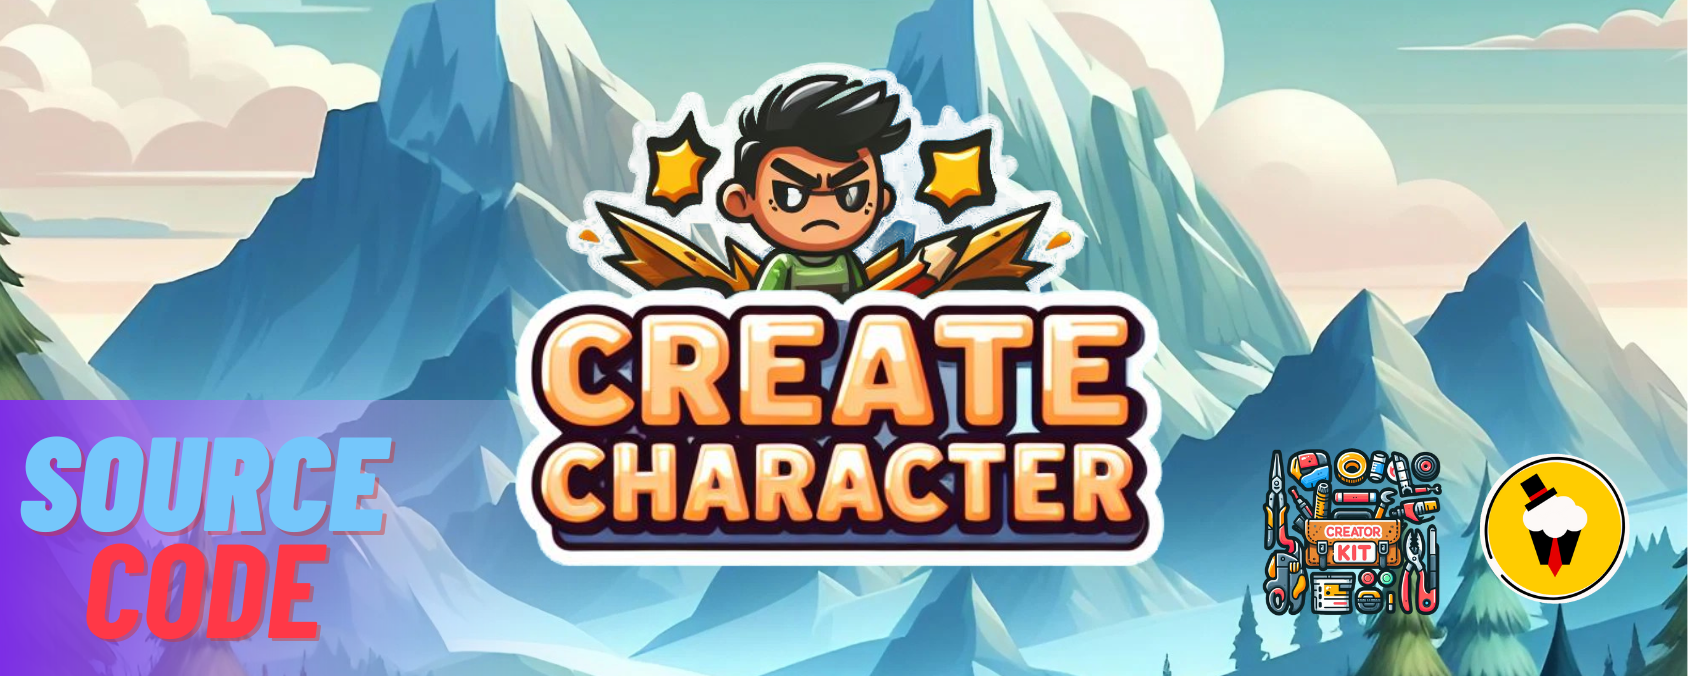 Create Character - ClickTeam Fusion 2.5 character creator example source code